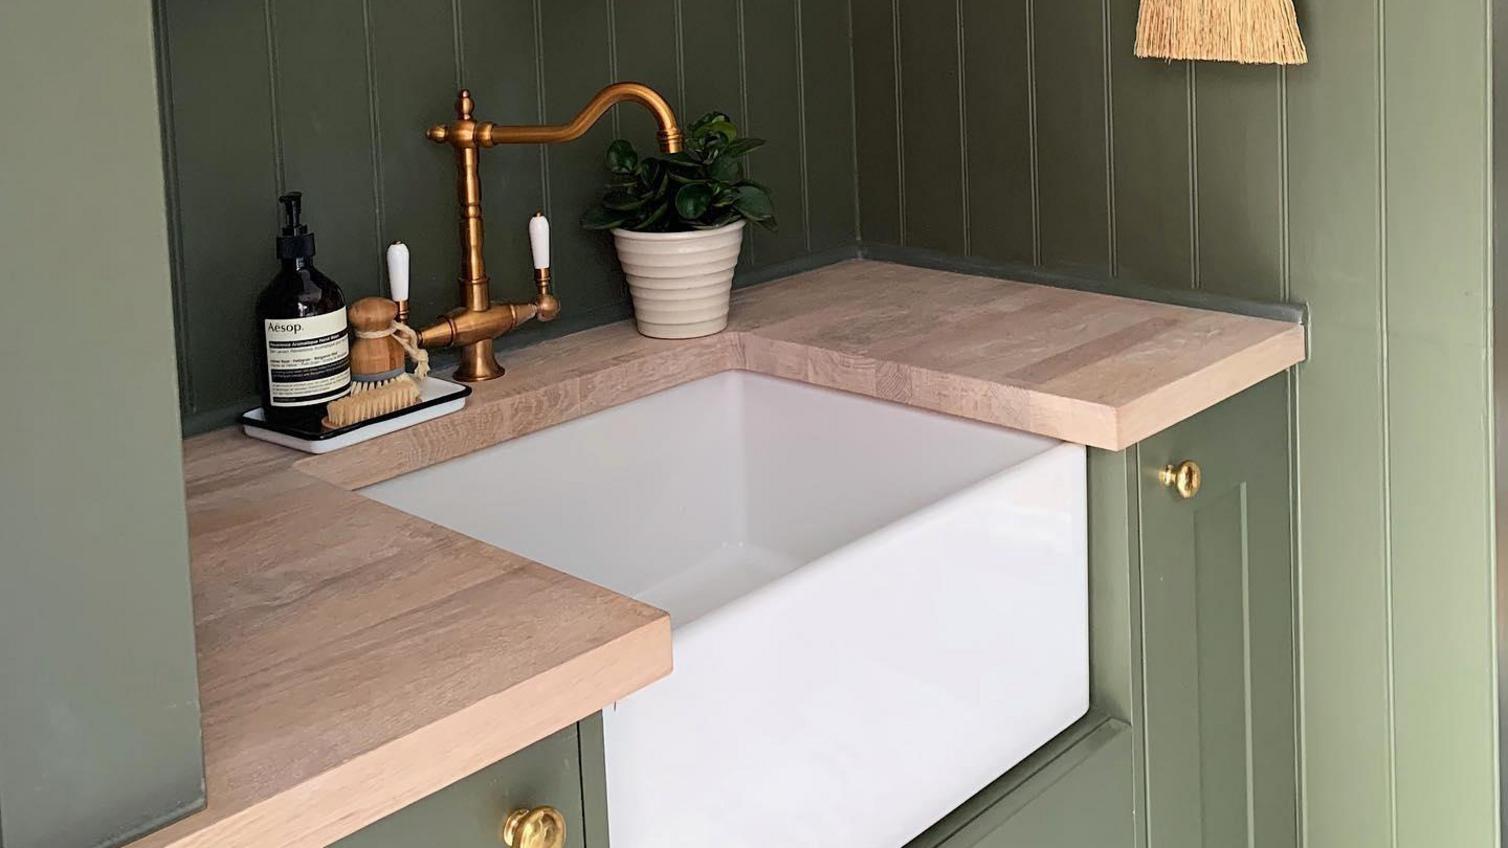 Green panelled sink area with a ceramic belfast sink, light oak worktop, hanging rod with accessories and a copper tap.